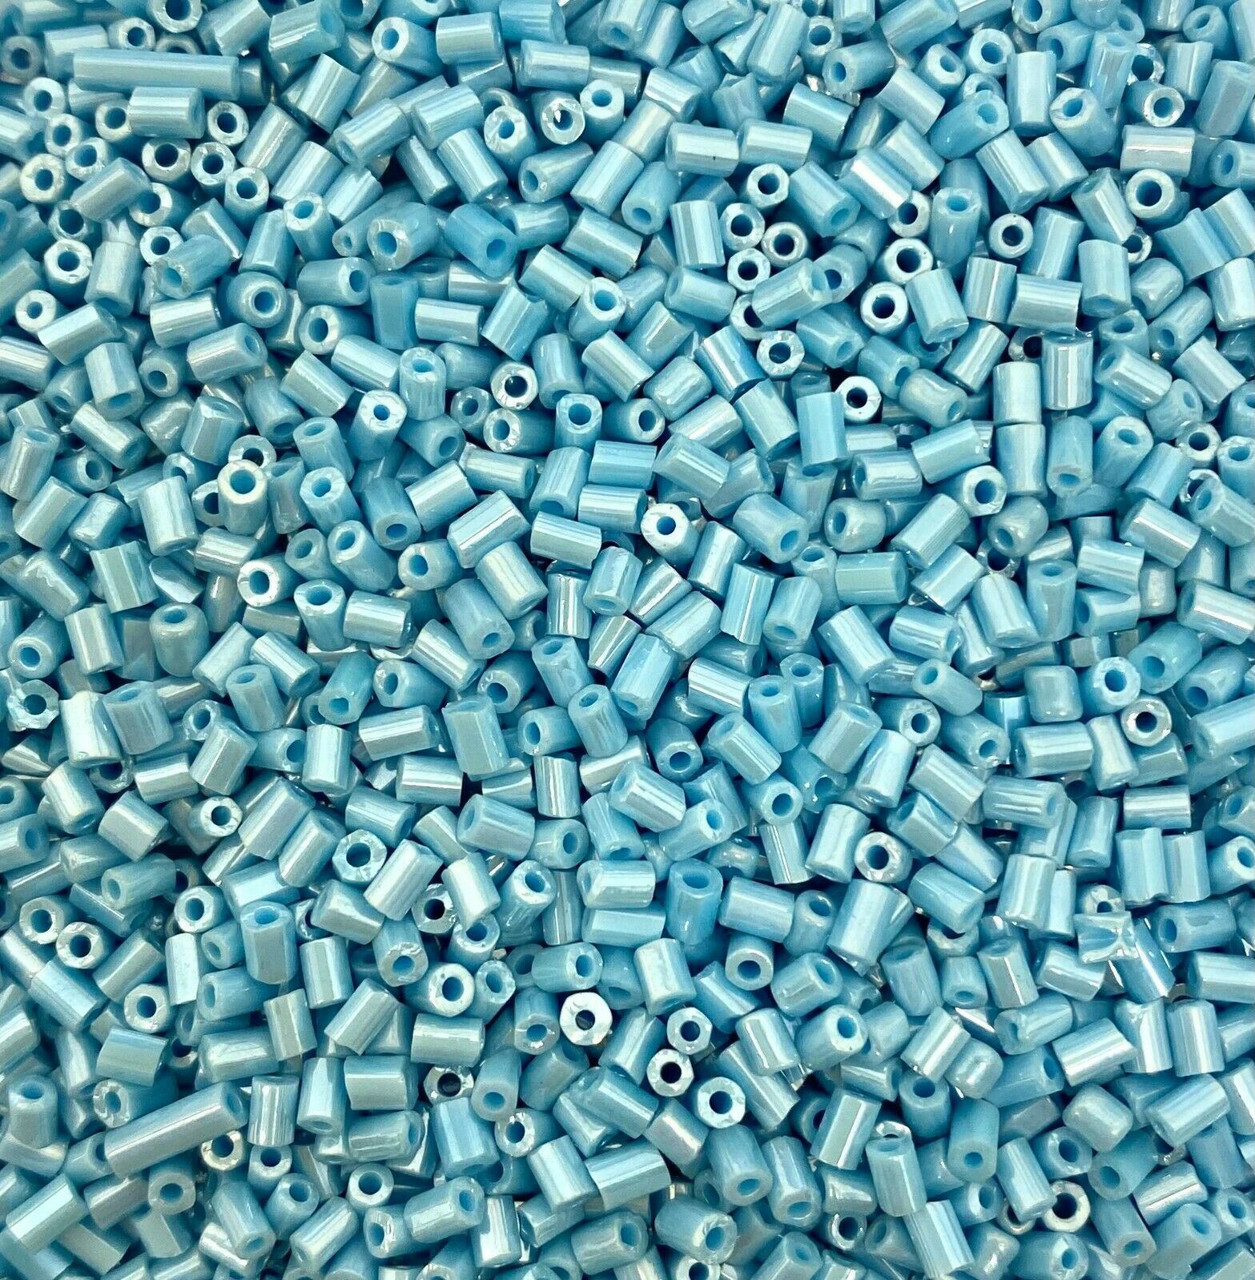 50g glass HEX seed beads - Light Blue Opaque Lustred- size 11/0 (approx 2mm)